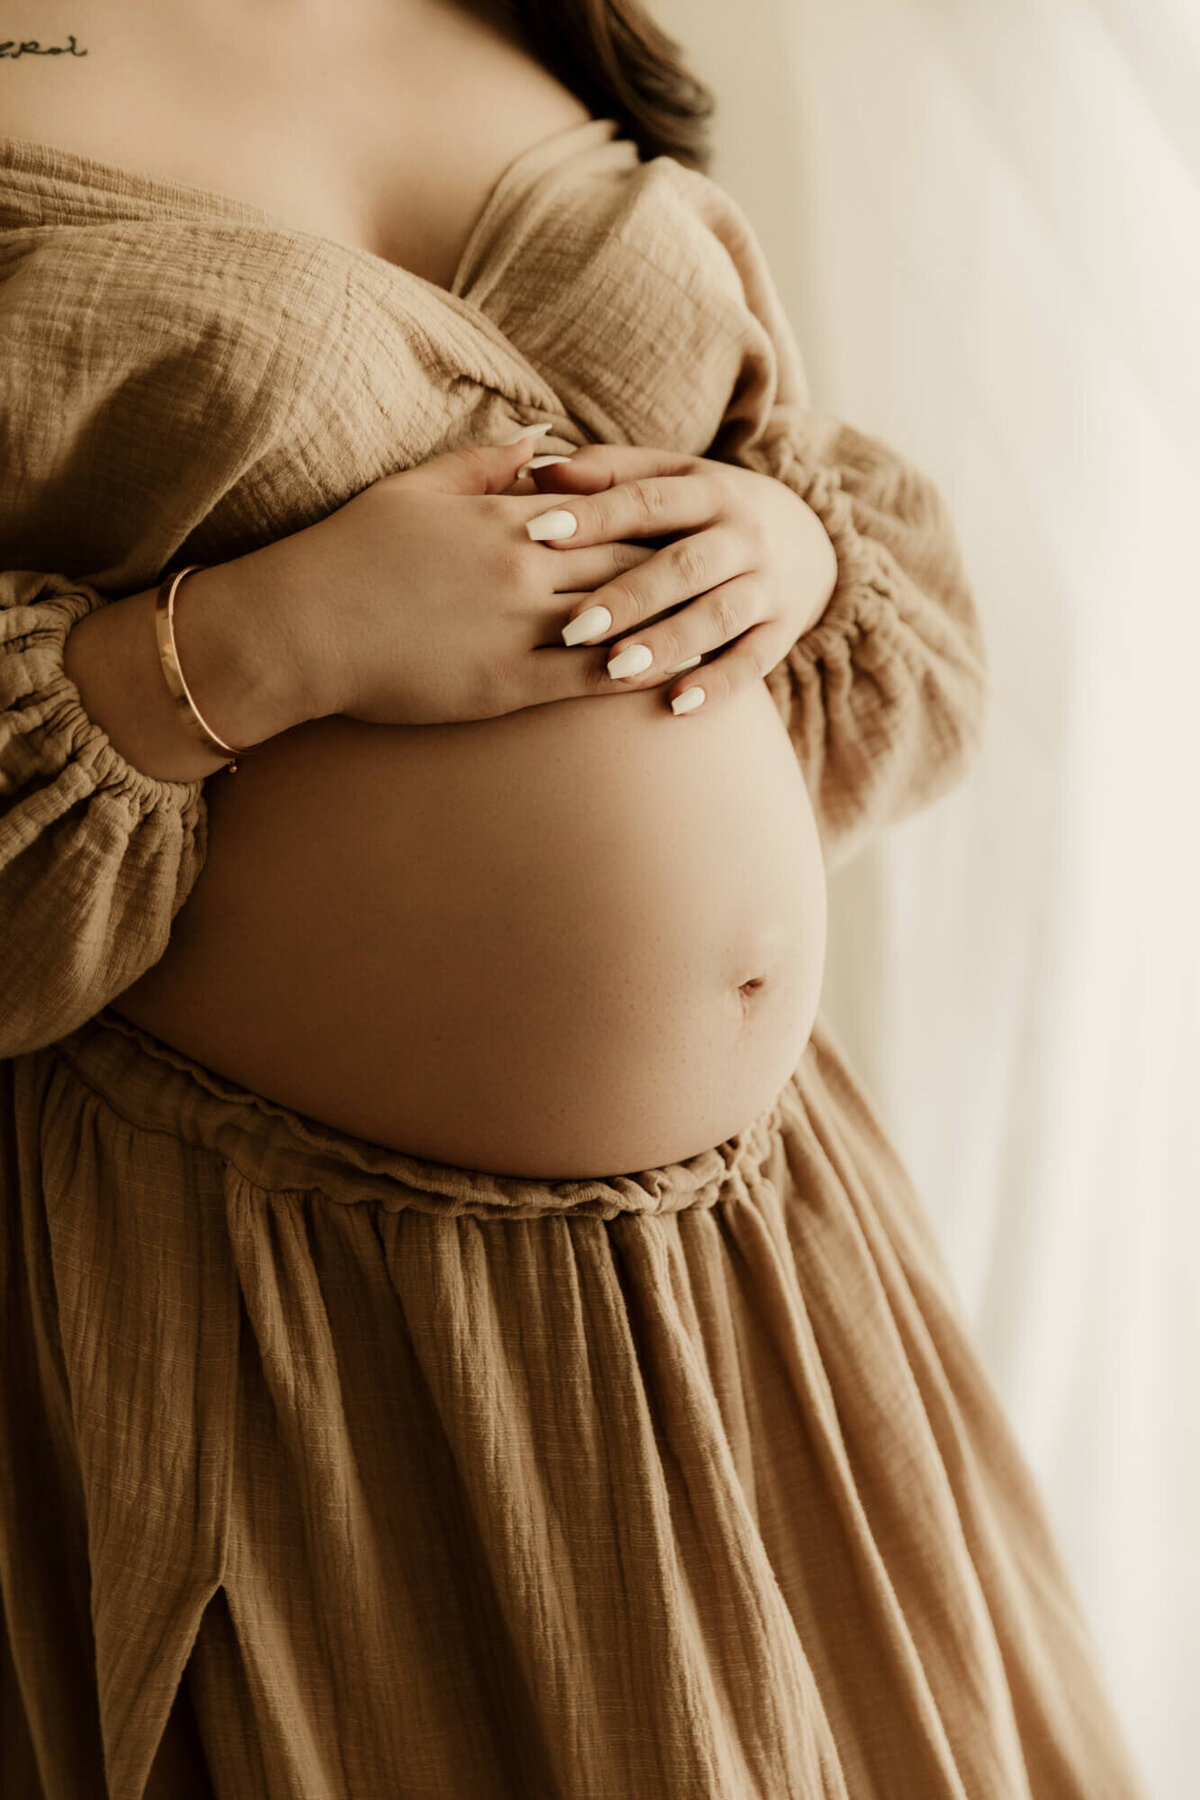 Baby bump portrait of a mother wearing a beige skirt and top.